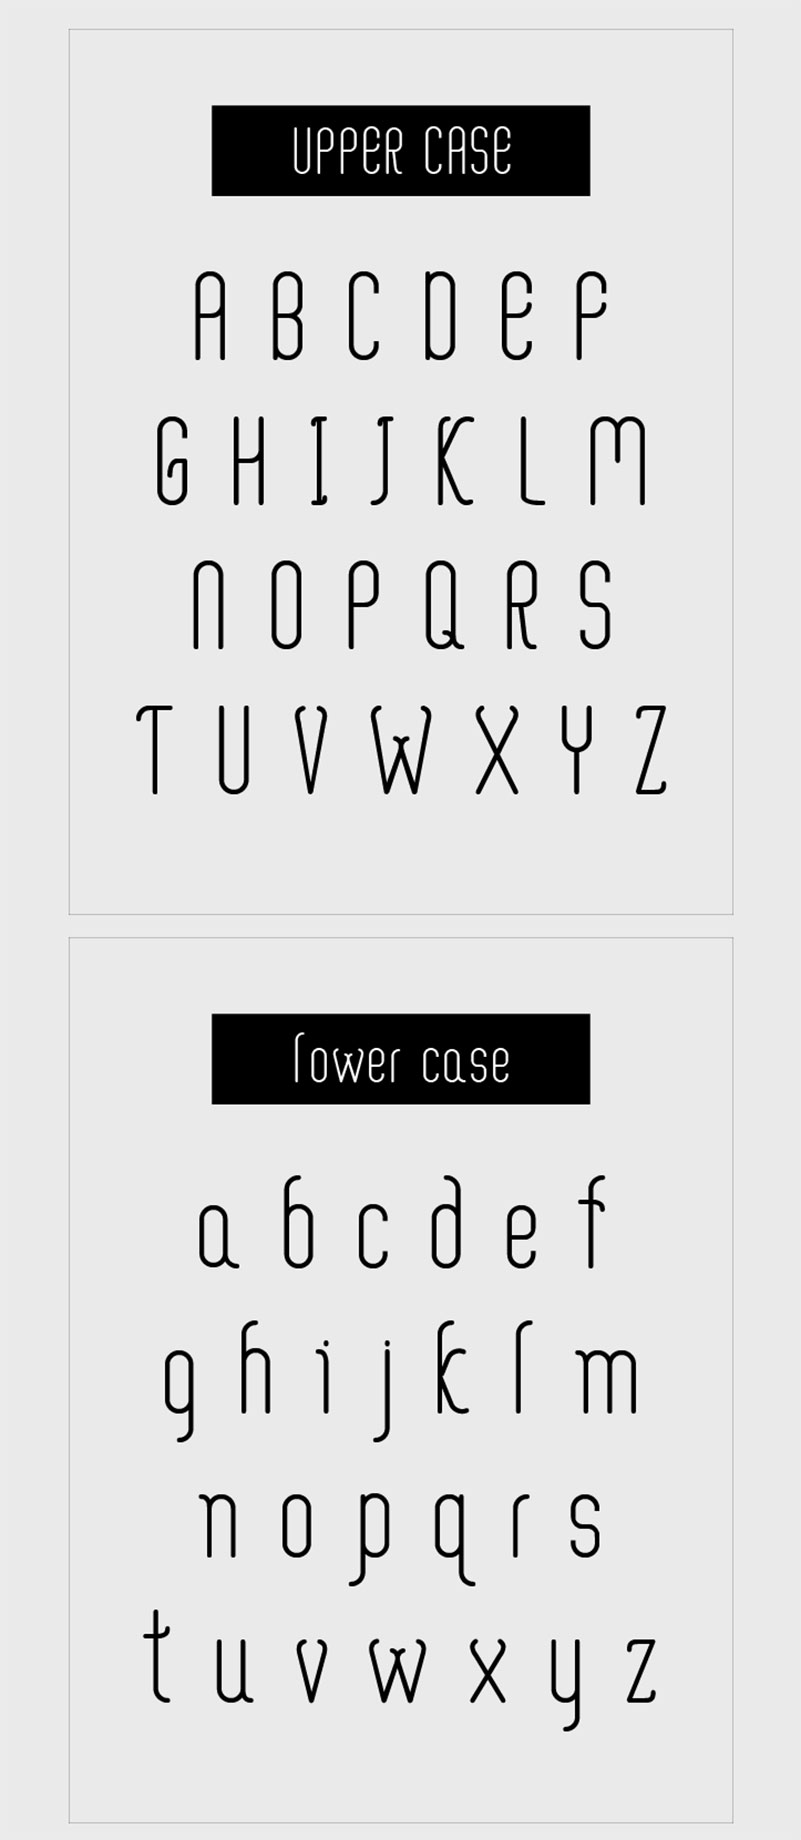 Aaram - 100-greatest-free-fonts-of-2014-094a